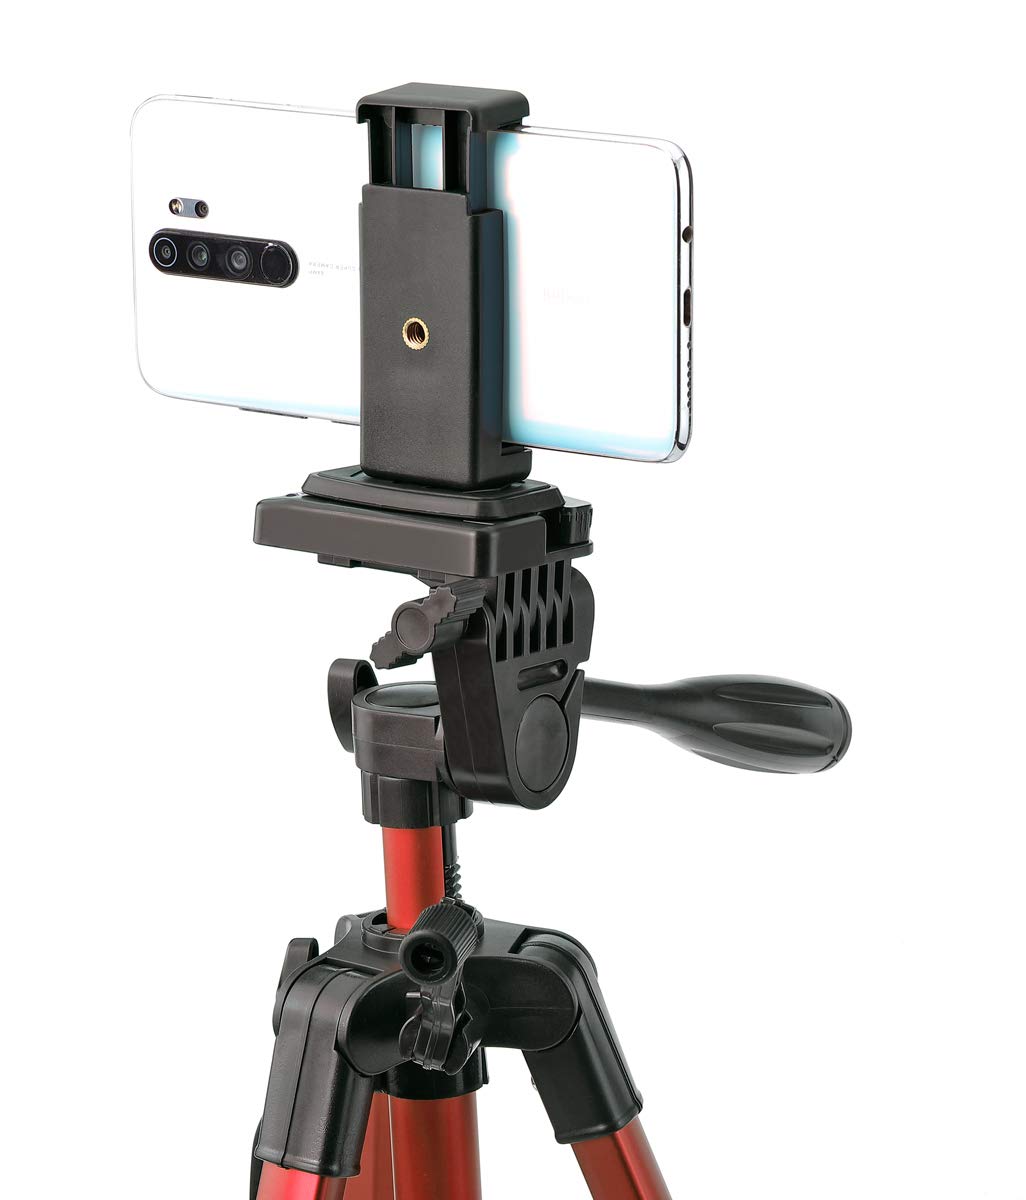 Simpex Camera Tripod 6633 with Mobile Holder Bracket for Smartphones, DSLR and Cameras Red